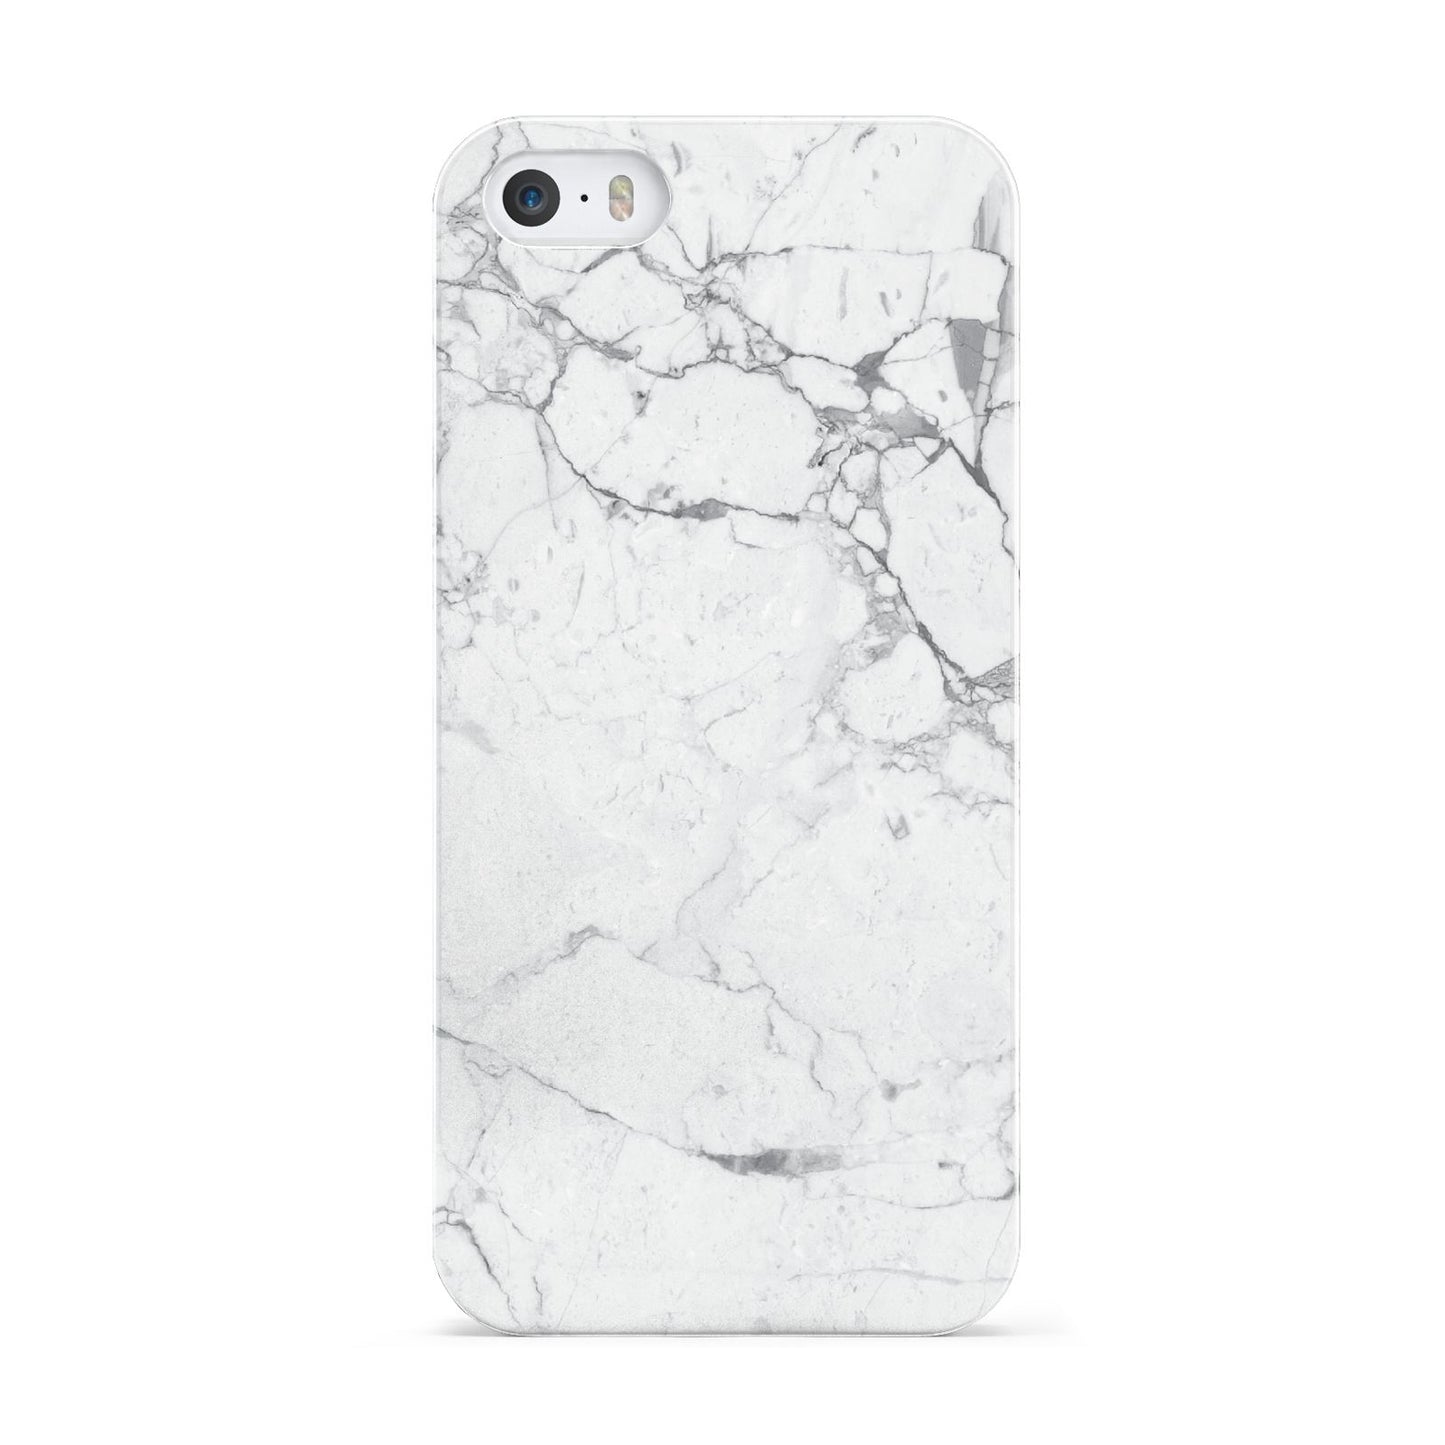 Faux Marble Effect Grey White Apple iPhone 5 Case